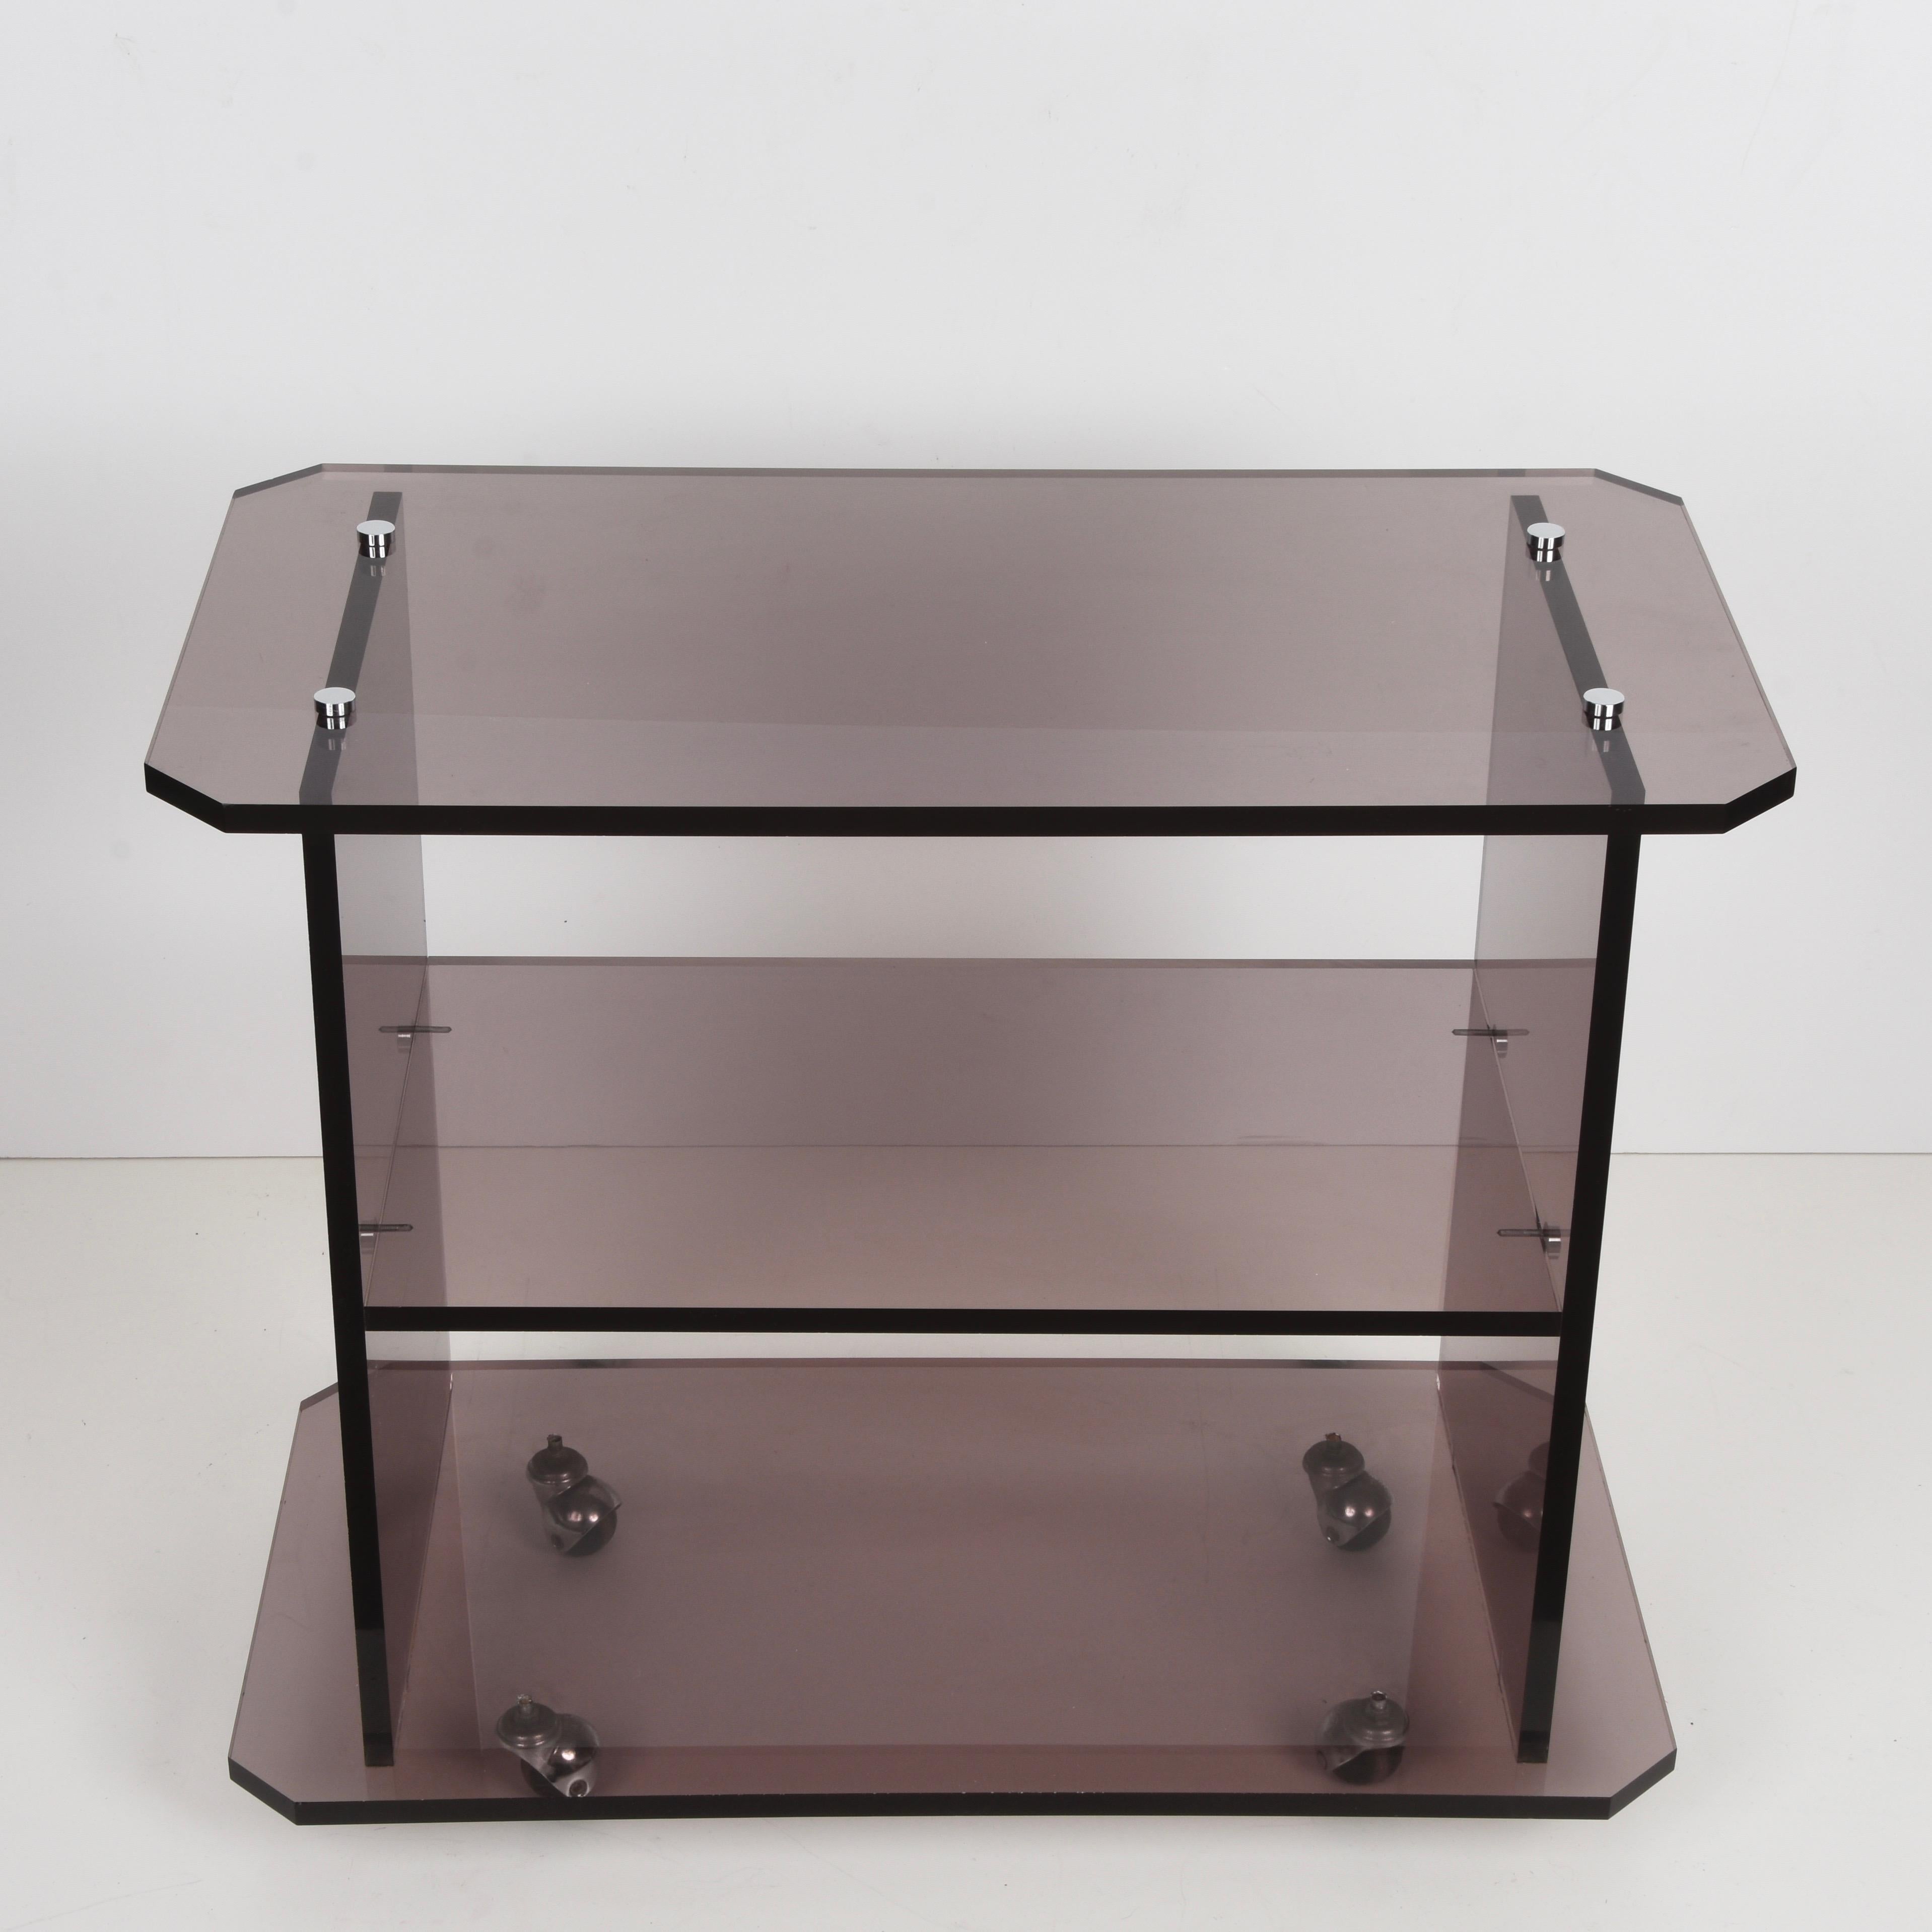 Elegant midcentury service trolley in smoked plexiglass. This magnificent item is in the style of Willy Rizzo and was produced in Italy during the 1980s.

This piece is unique because of the synthetic lines and the material, that allows exploring